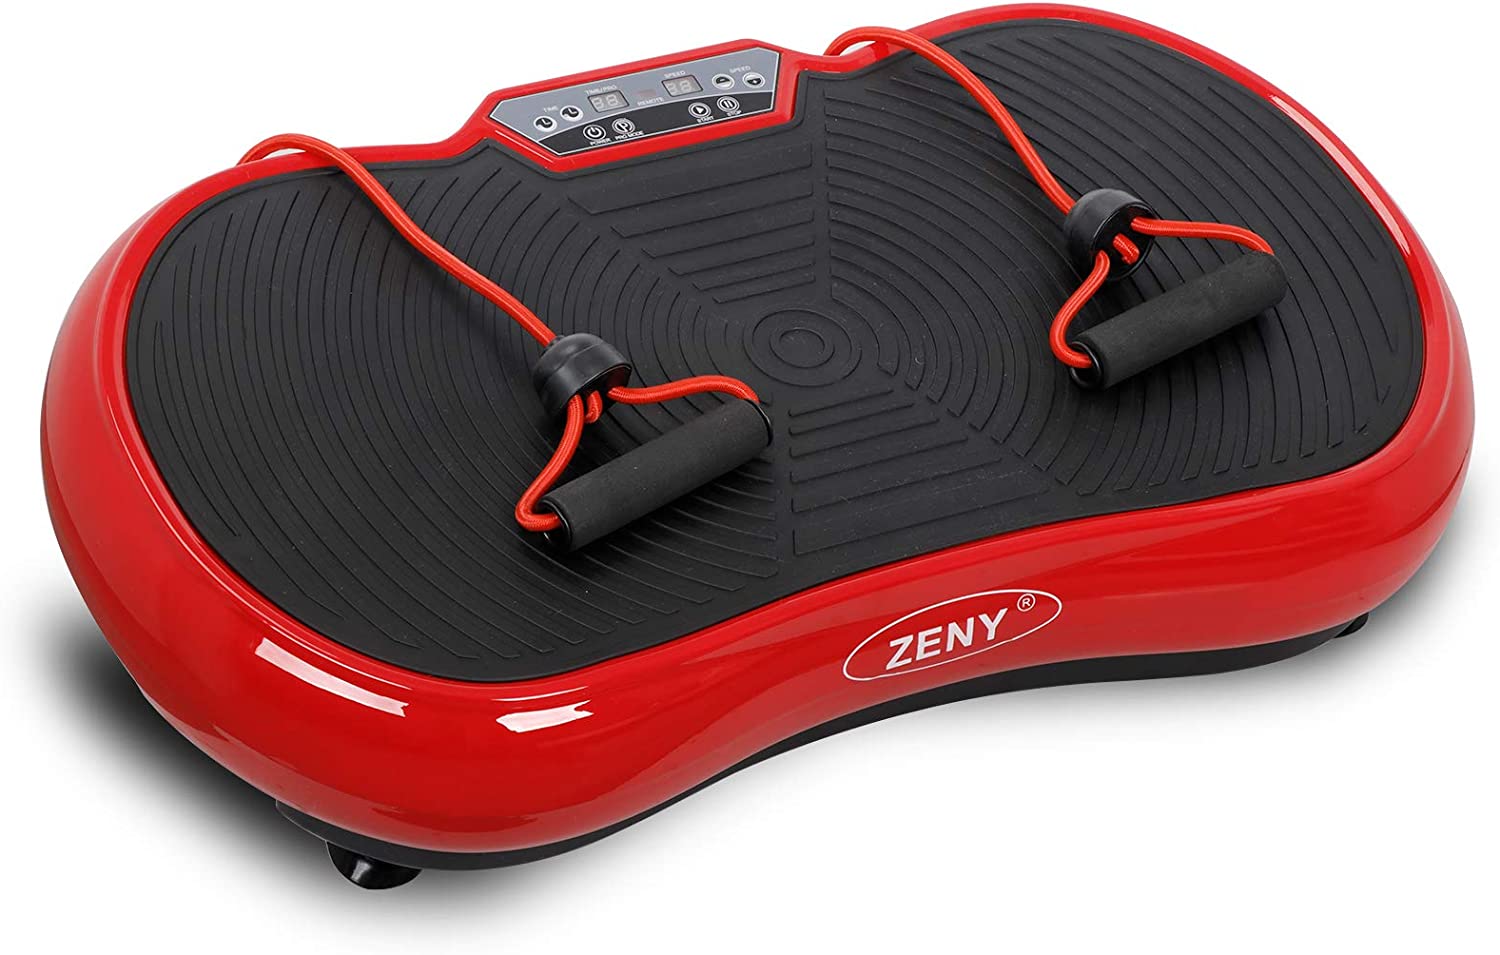  5. ZENY Vibrating Exercise Machines with ABS Shell 